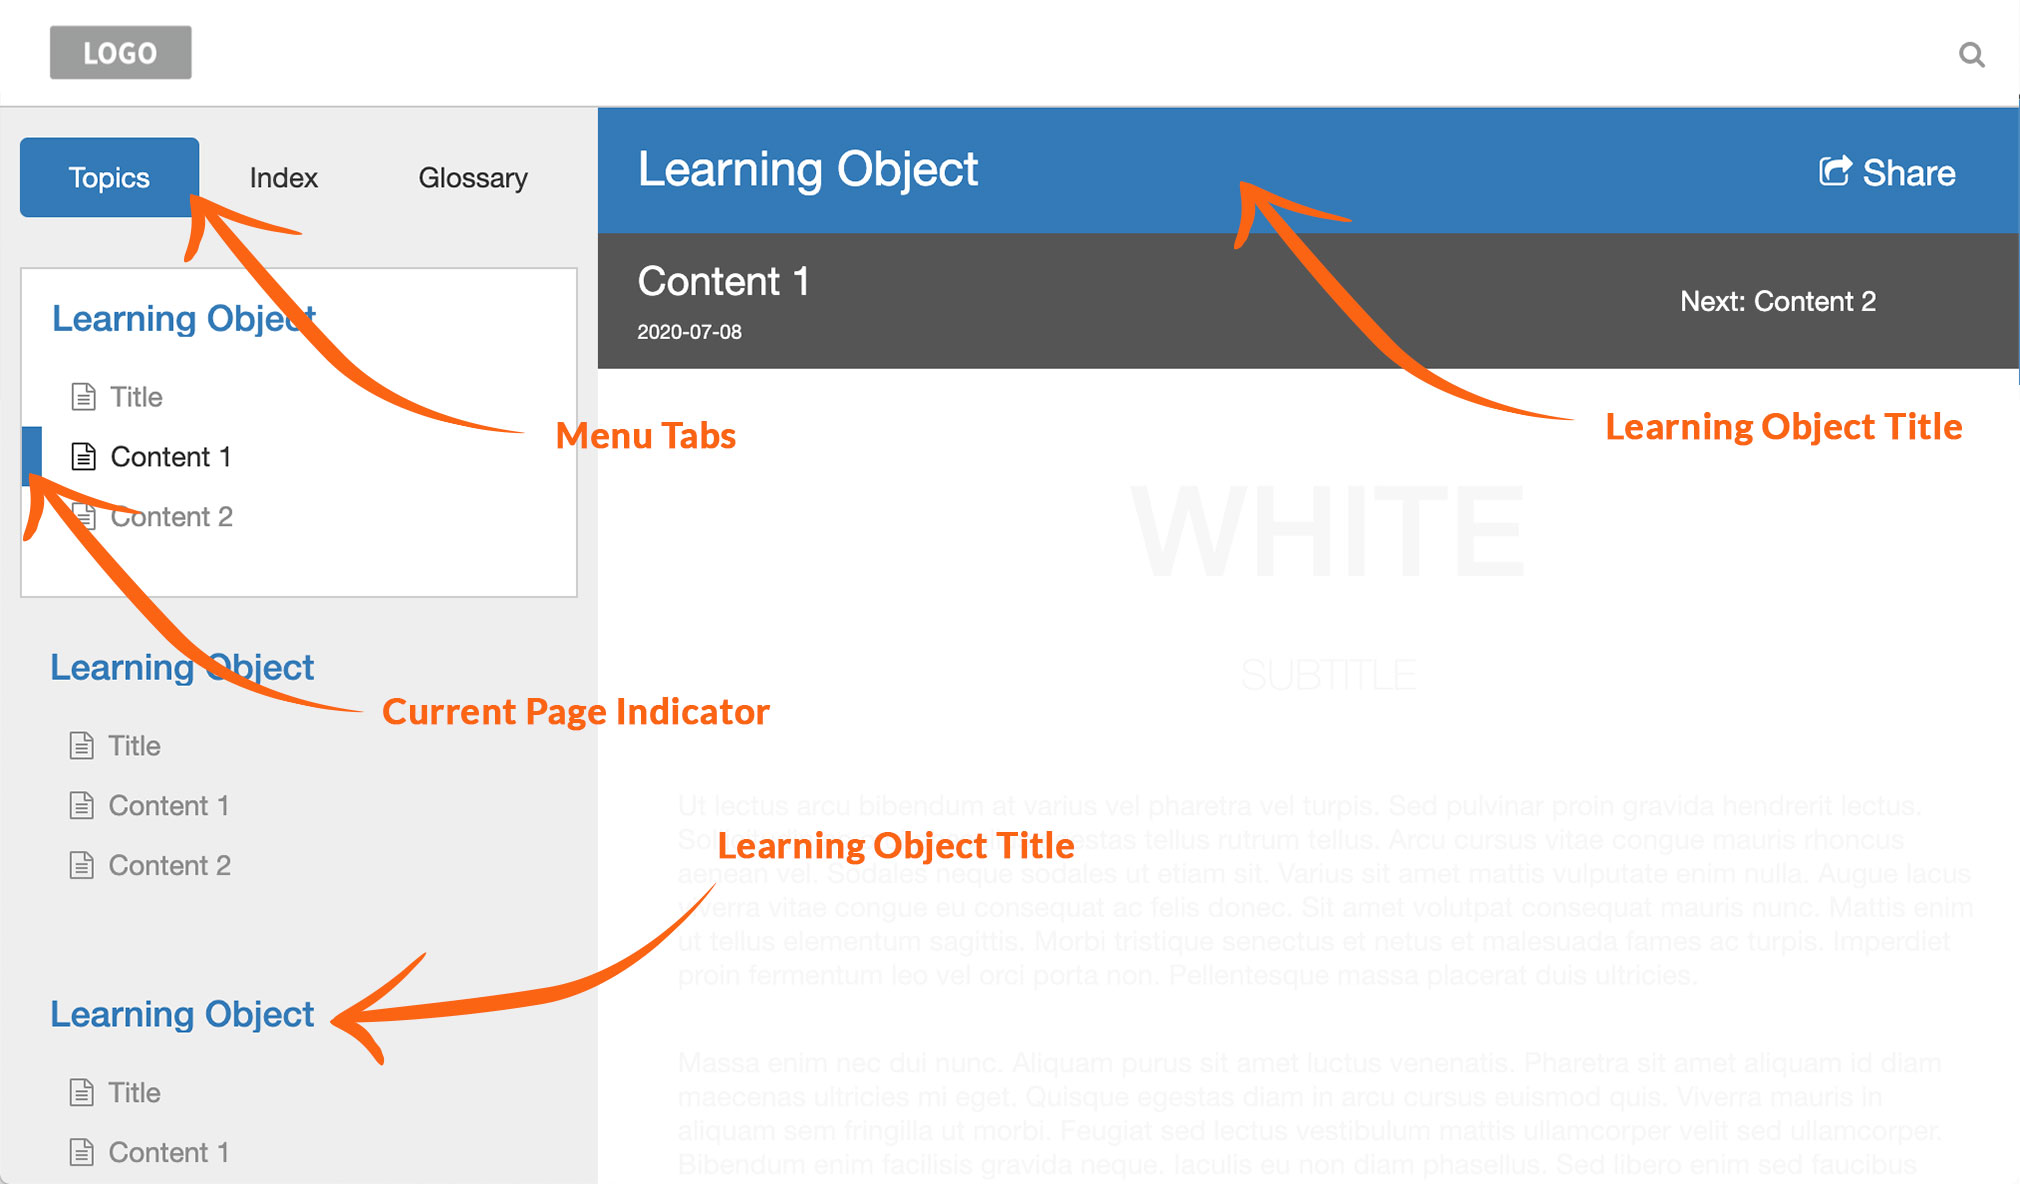 Knowledge Base -Menu tabs, Topics, Current page indicator, LO Title bar